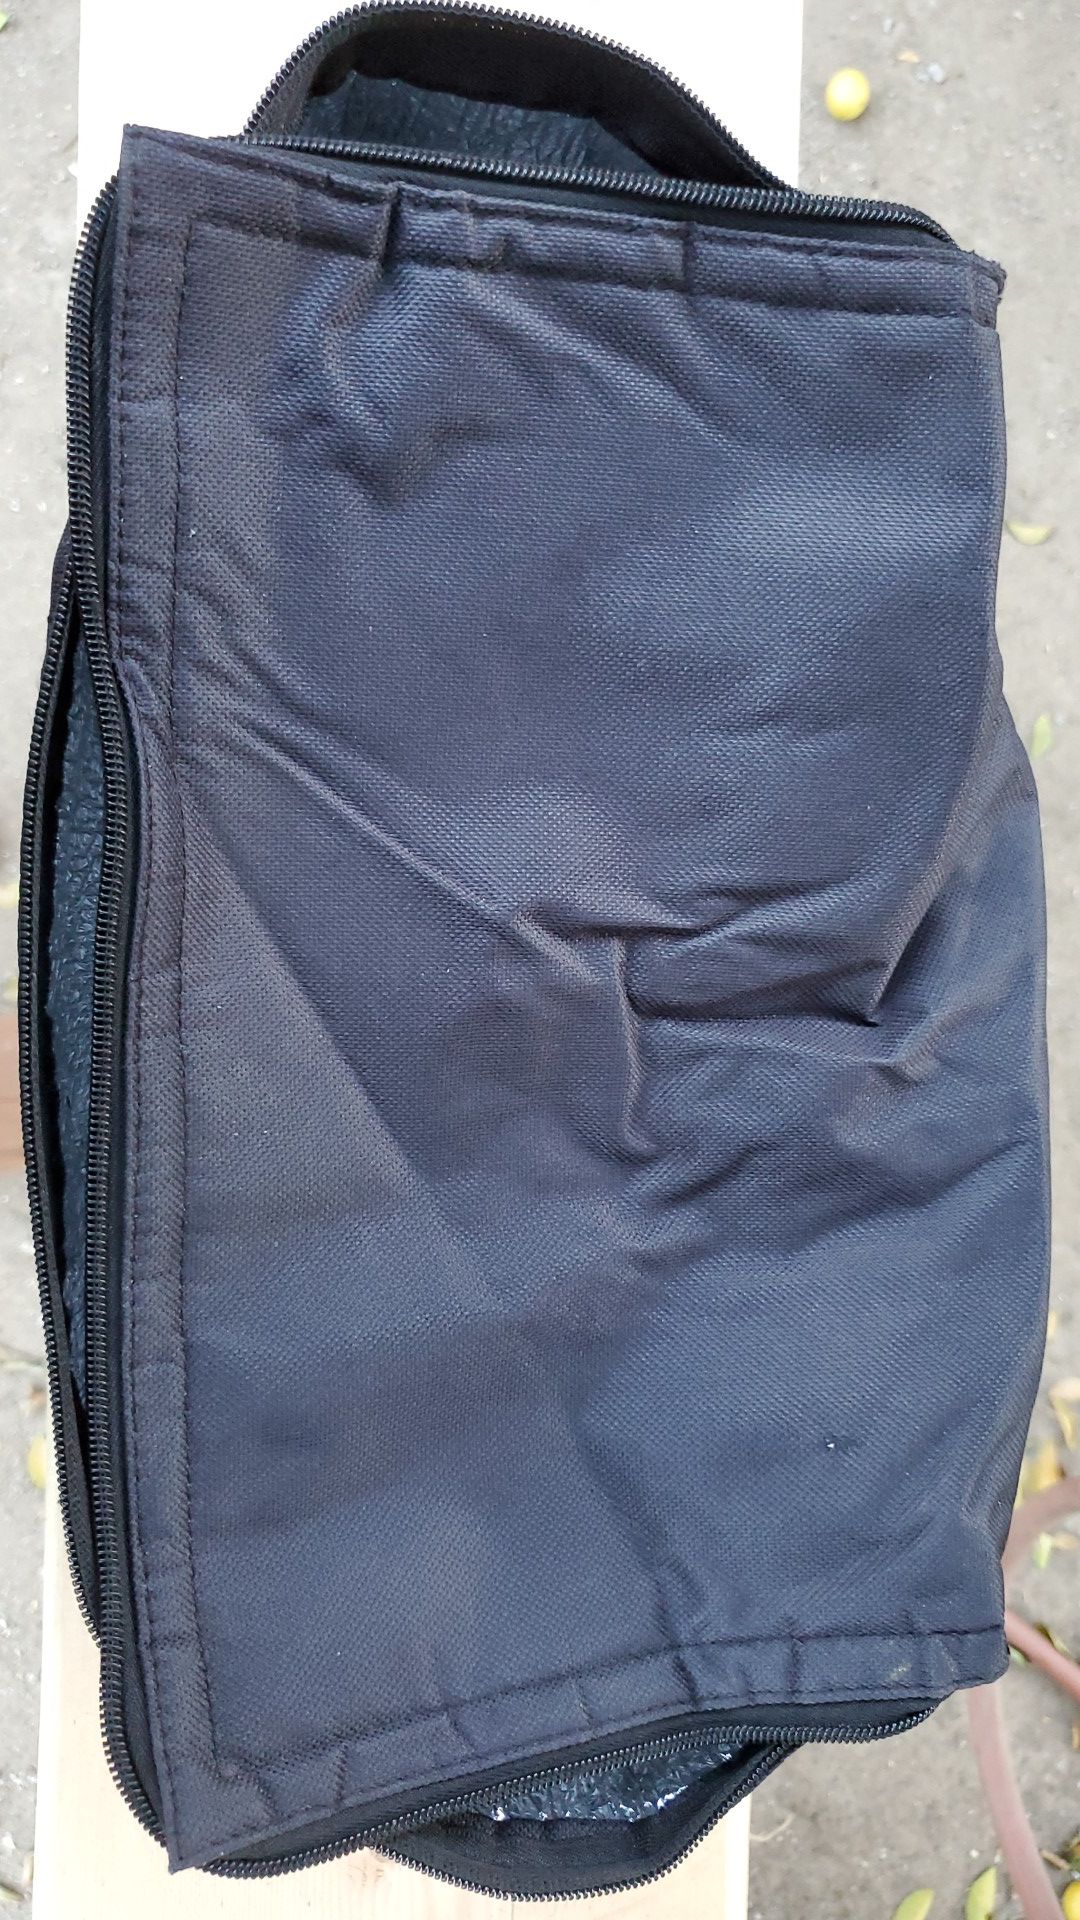 Large lunch bag